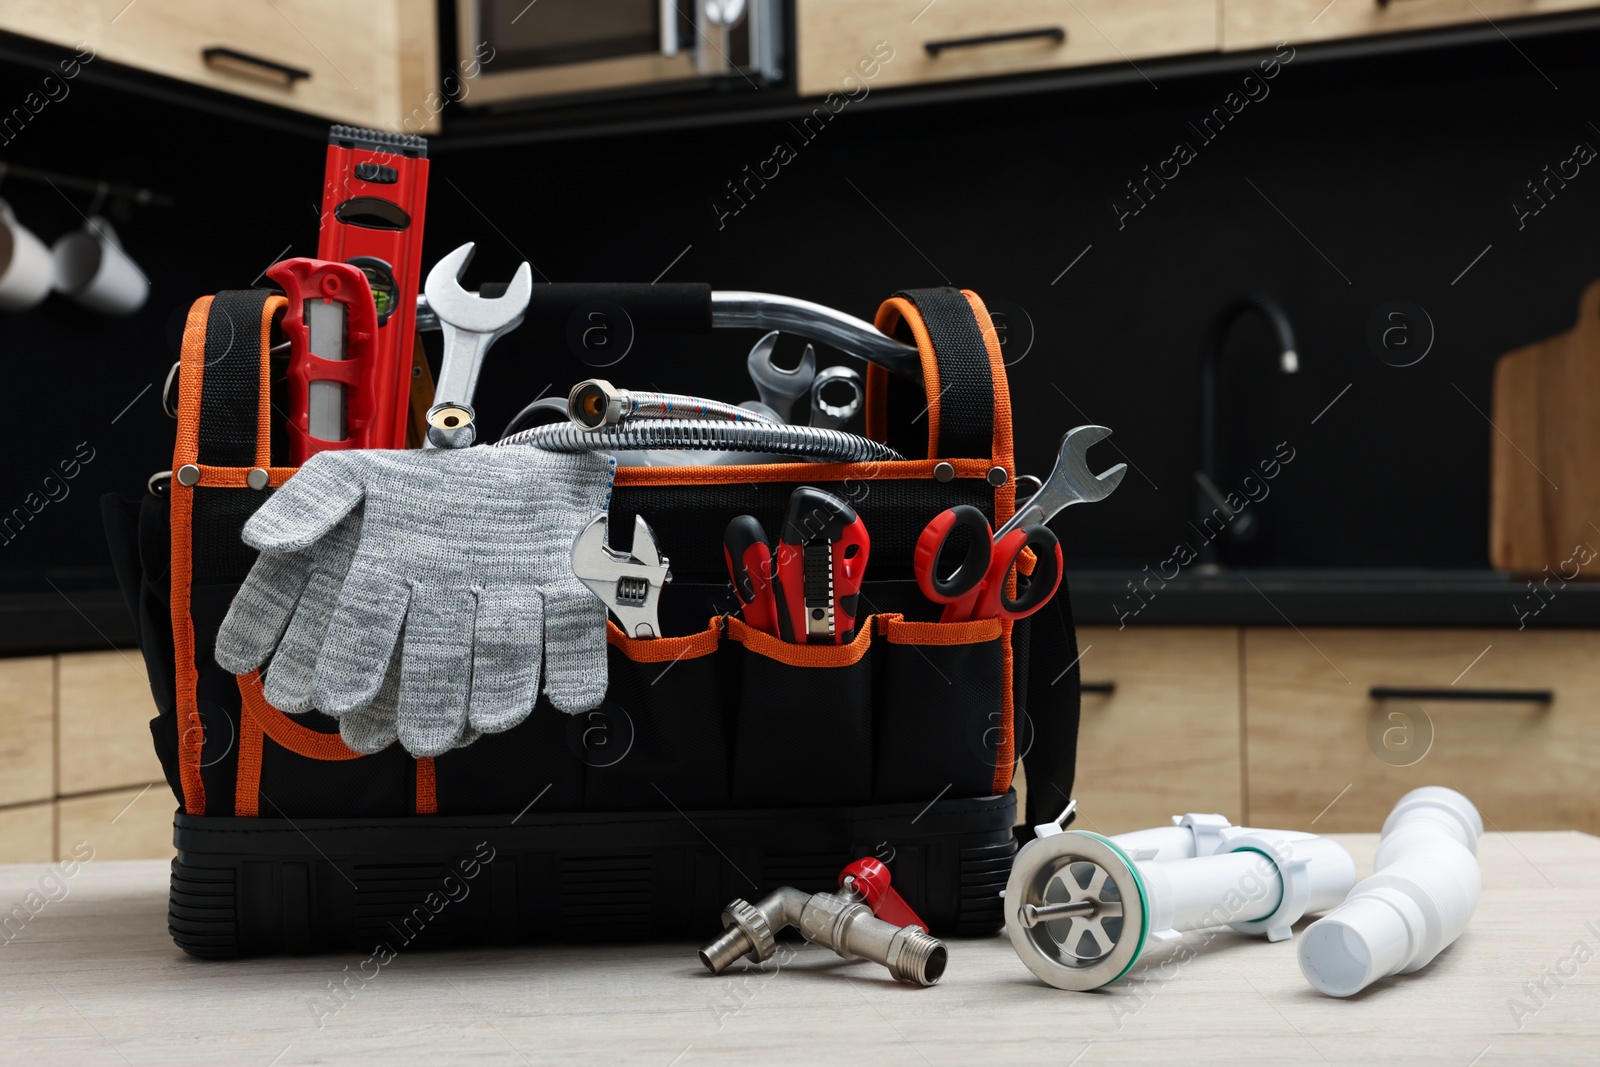 Photo of Plumber's tool bag and pipes on table in kitchen